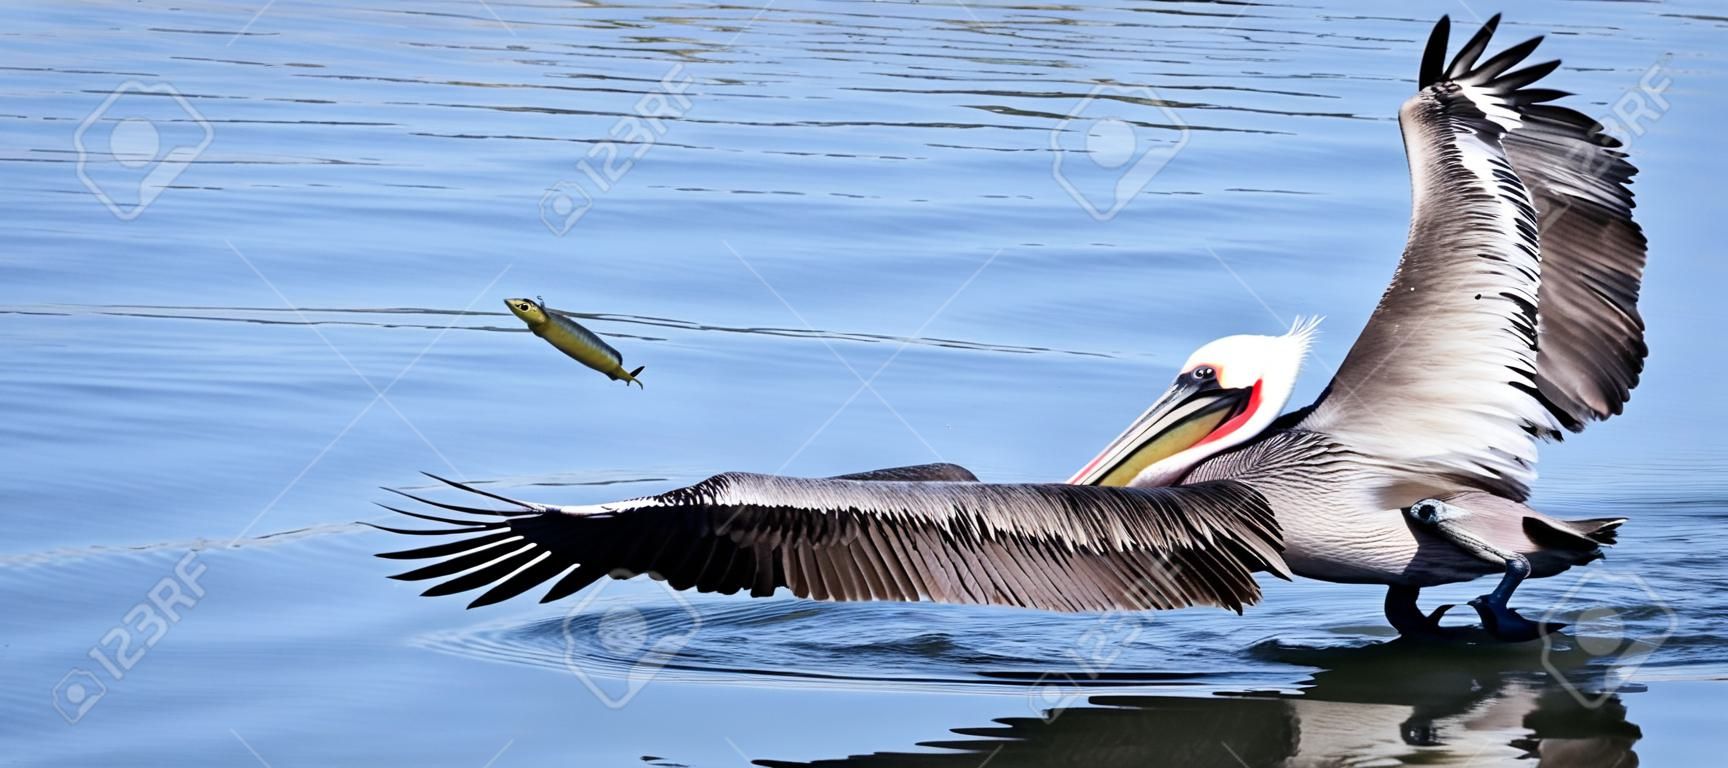 A Brown Pelican Catches a Fish with its Long Bill at the Surface of the Water